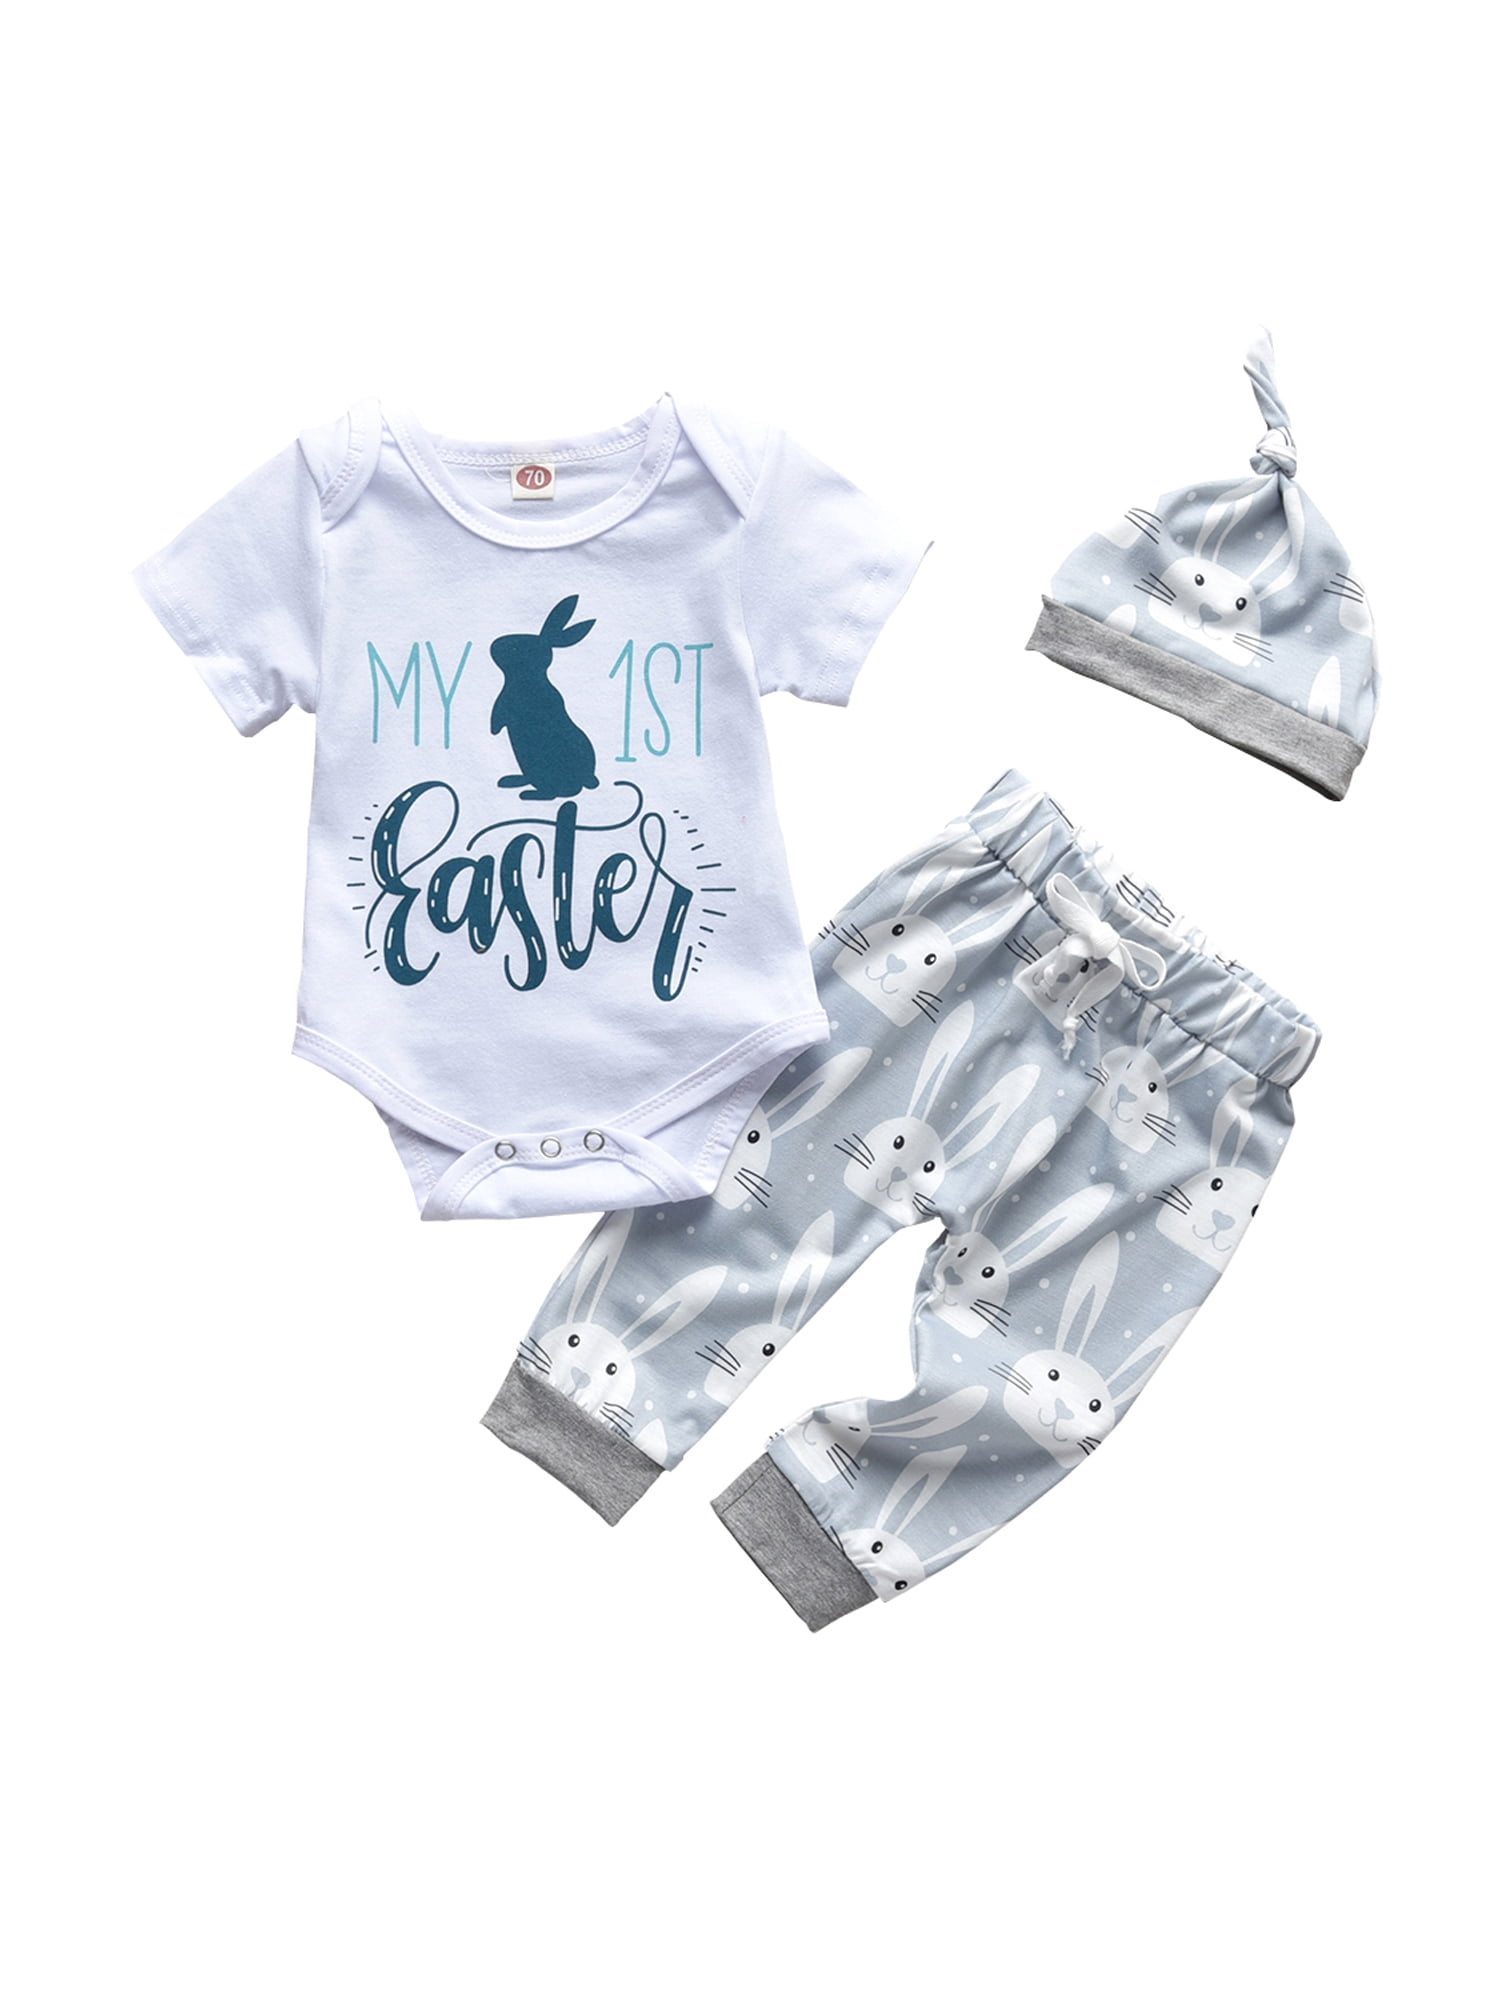 Baby Boy Girls My 1st Easter Outfit Infant Letter Print Romper+Bunny Pants+Headband 3pcs Rabbit Outfits 